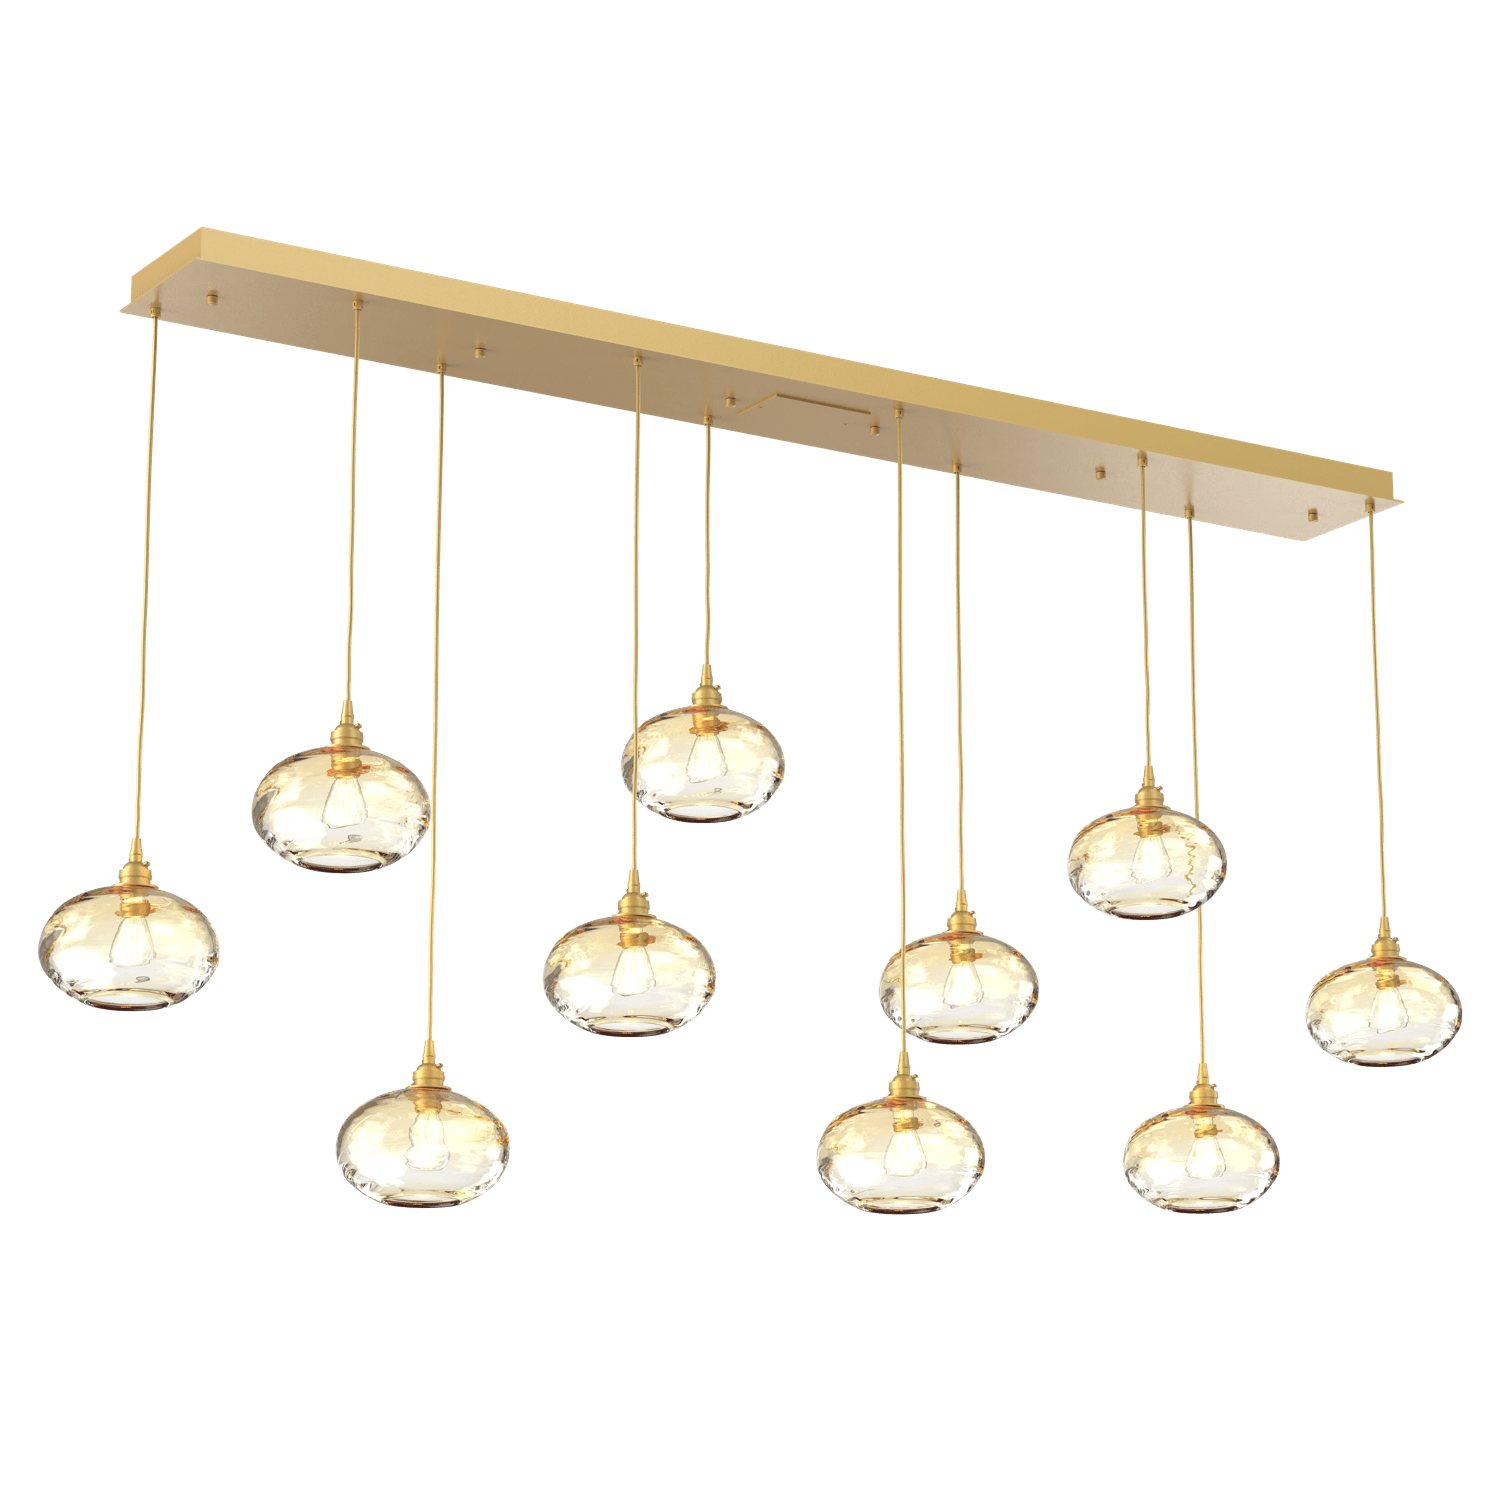 PLB0036-10-GB-OA-Hammerton-Studio-Optic-Blown-Glass-Coppa-10-light-linear-pendant-chandelier-with-gilded-brass-finish-and-optic-amber-blown-glass-shades-and-incandescent-lamping